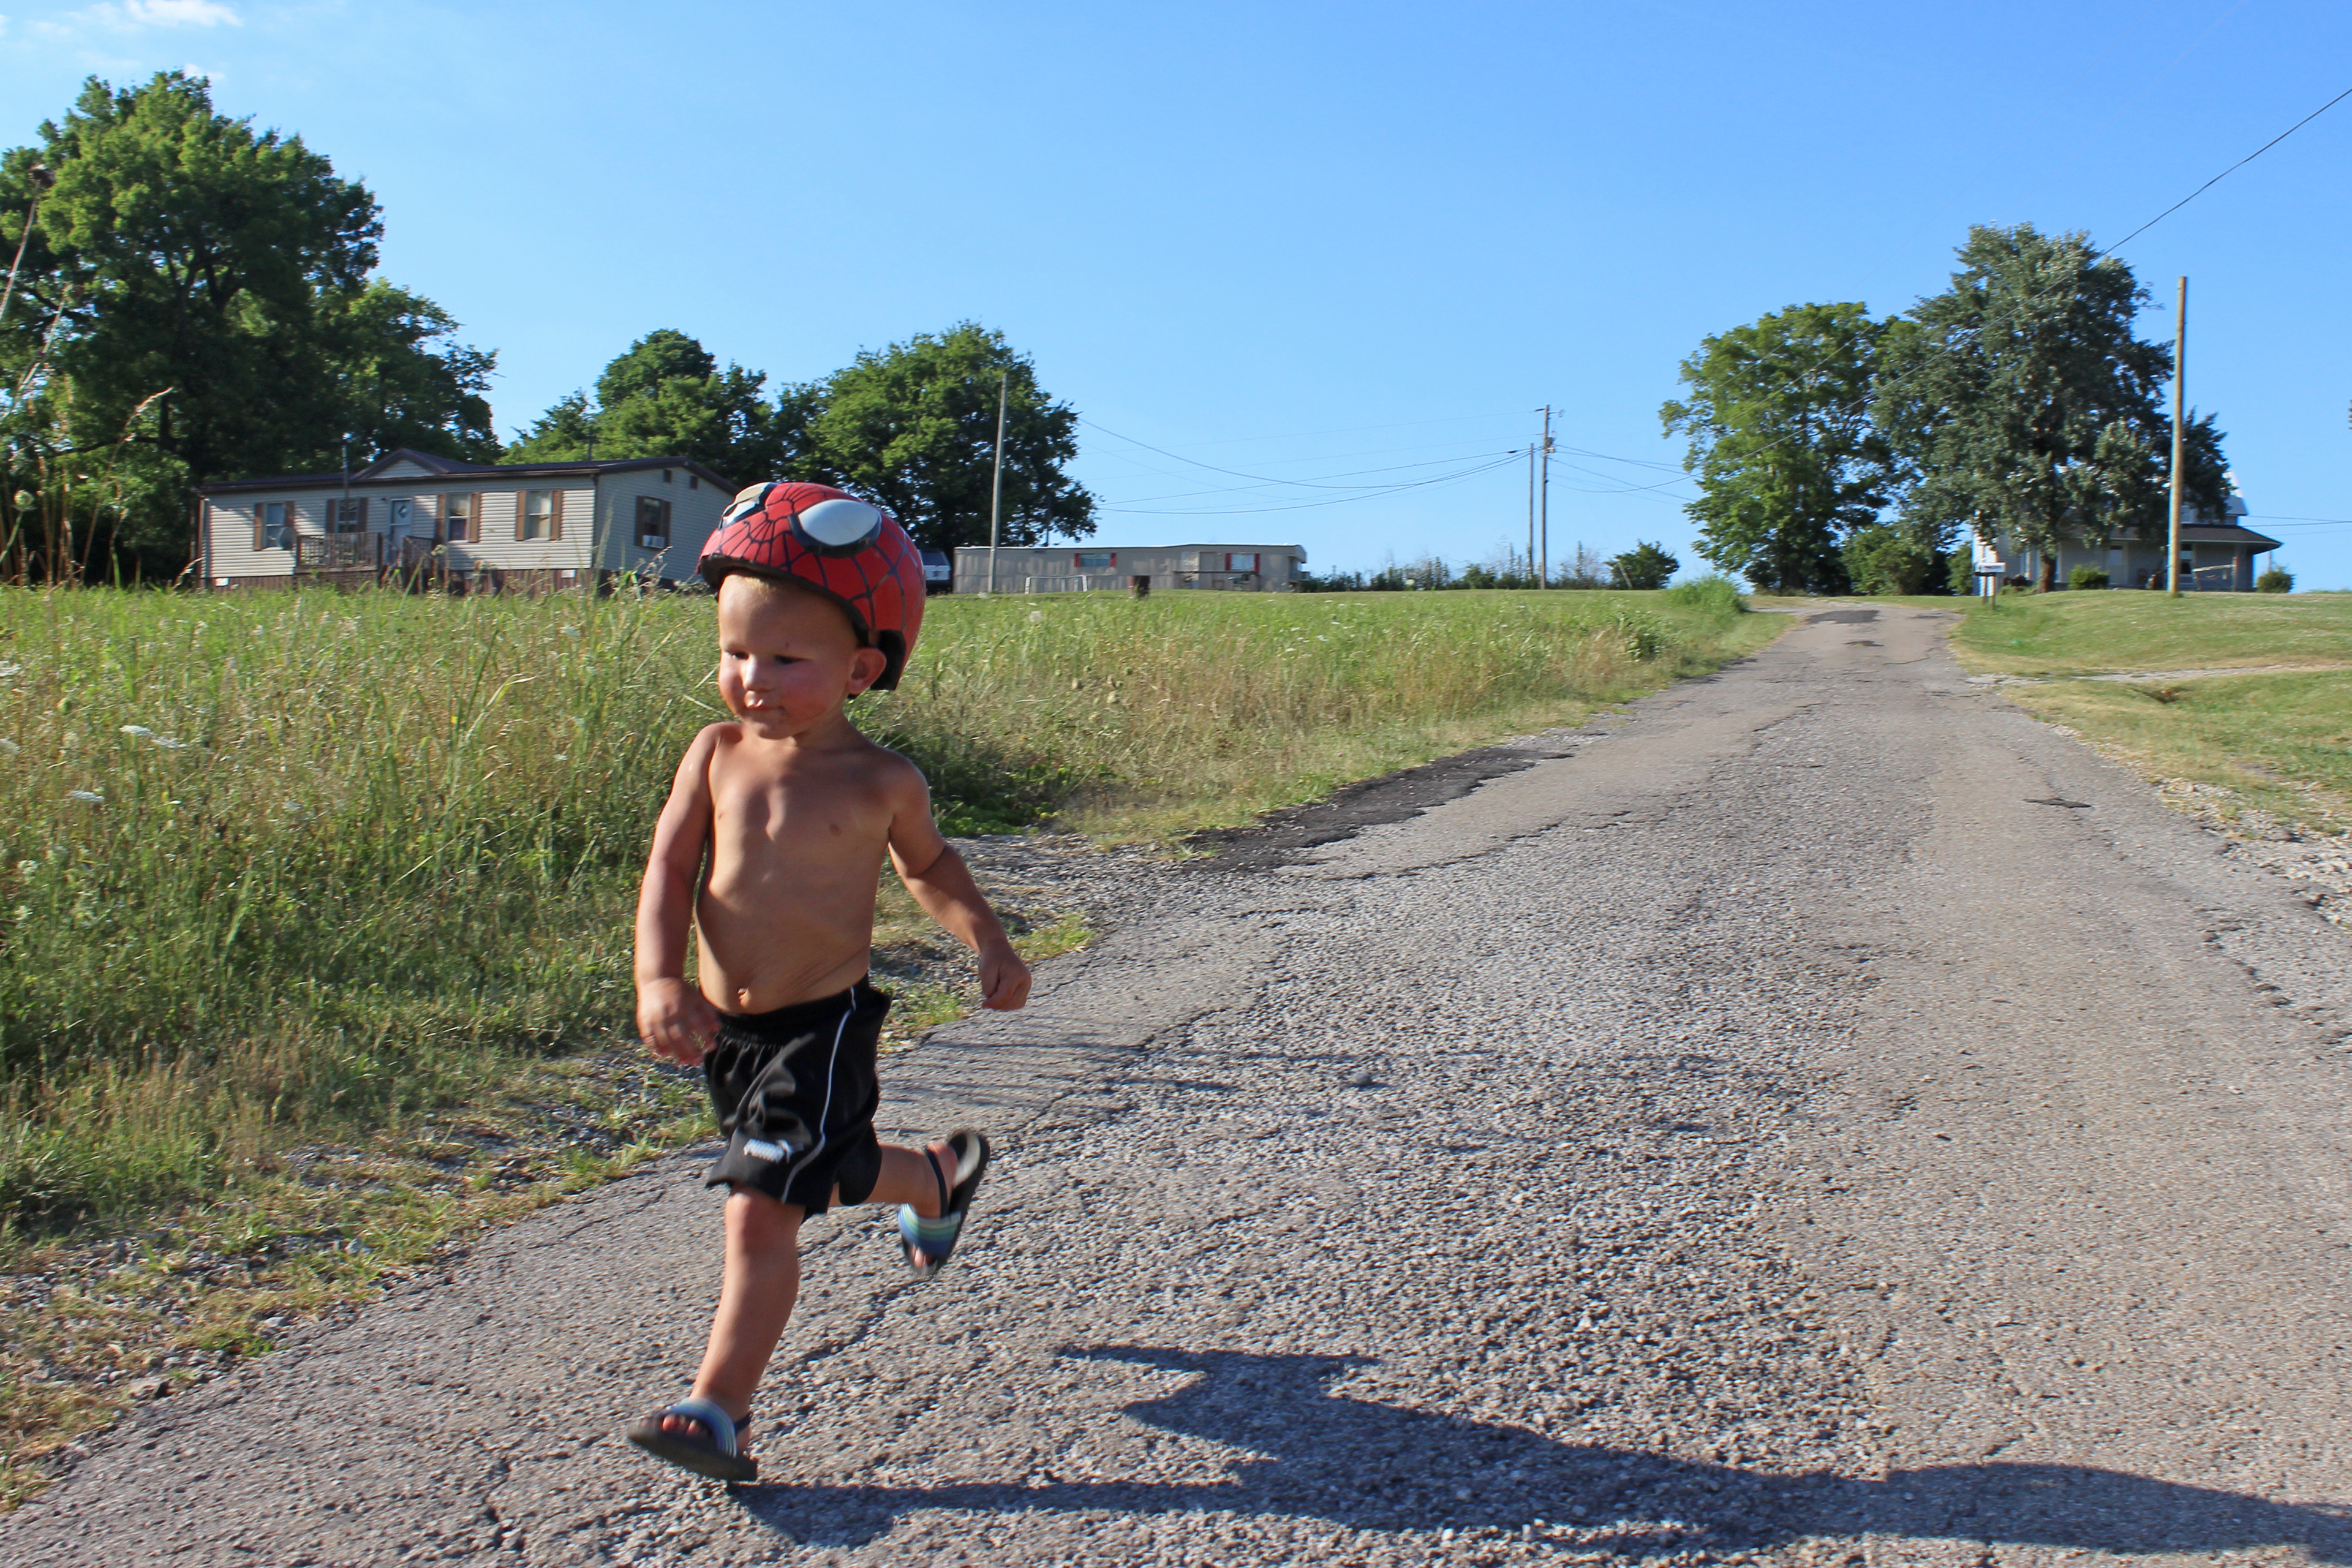 A photo shows Memphis Lester running on a country road.